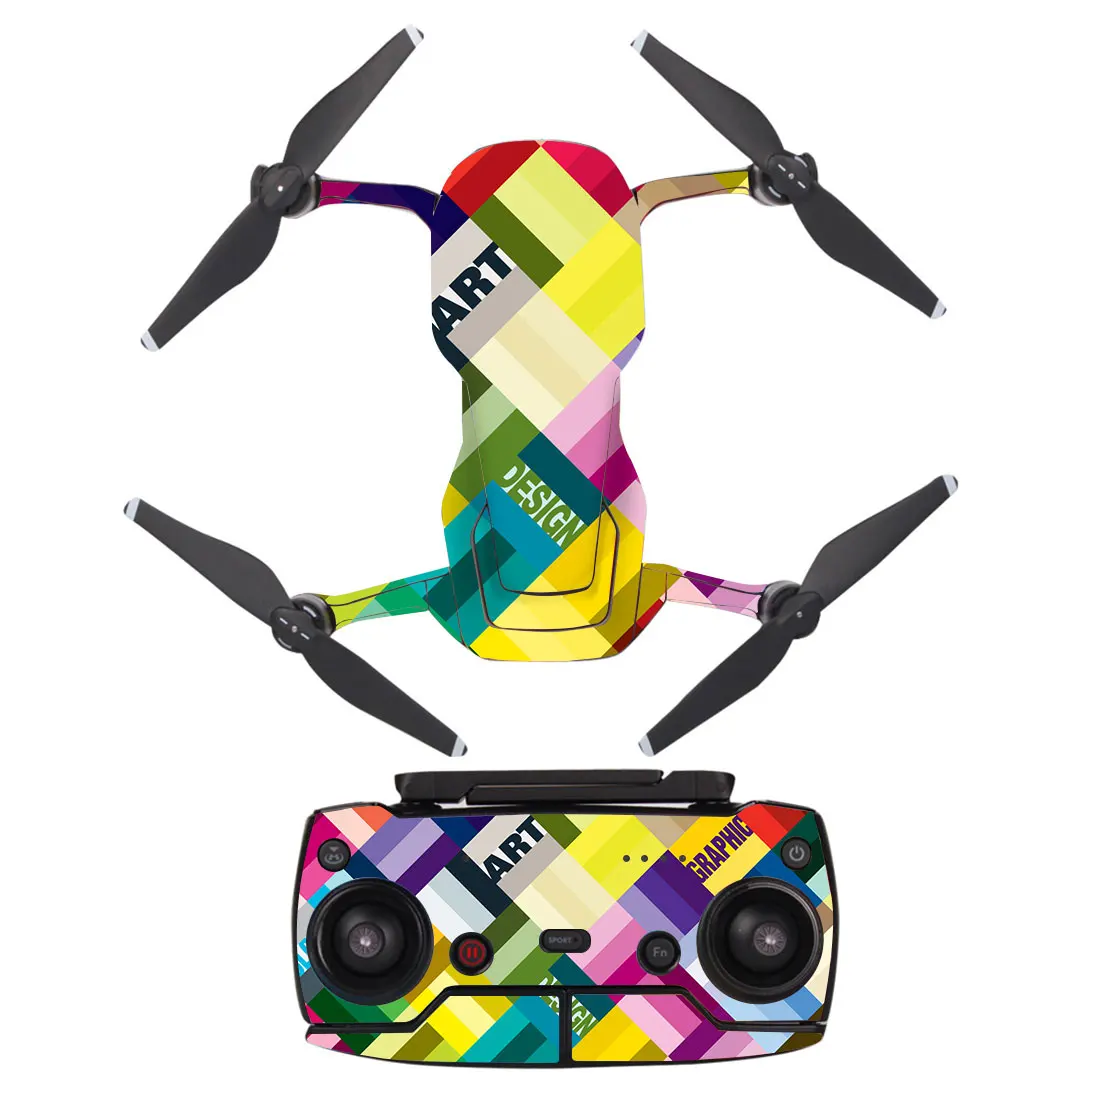 

Design Style Decal Vinyl Skin Sticker For DJI Mavic Air Drone + Remote Controllers + 3 Batteries Protection Film Cover